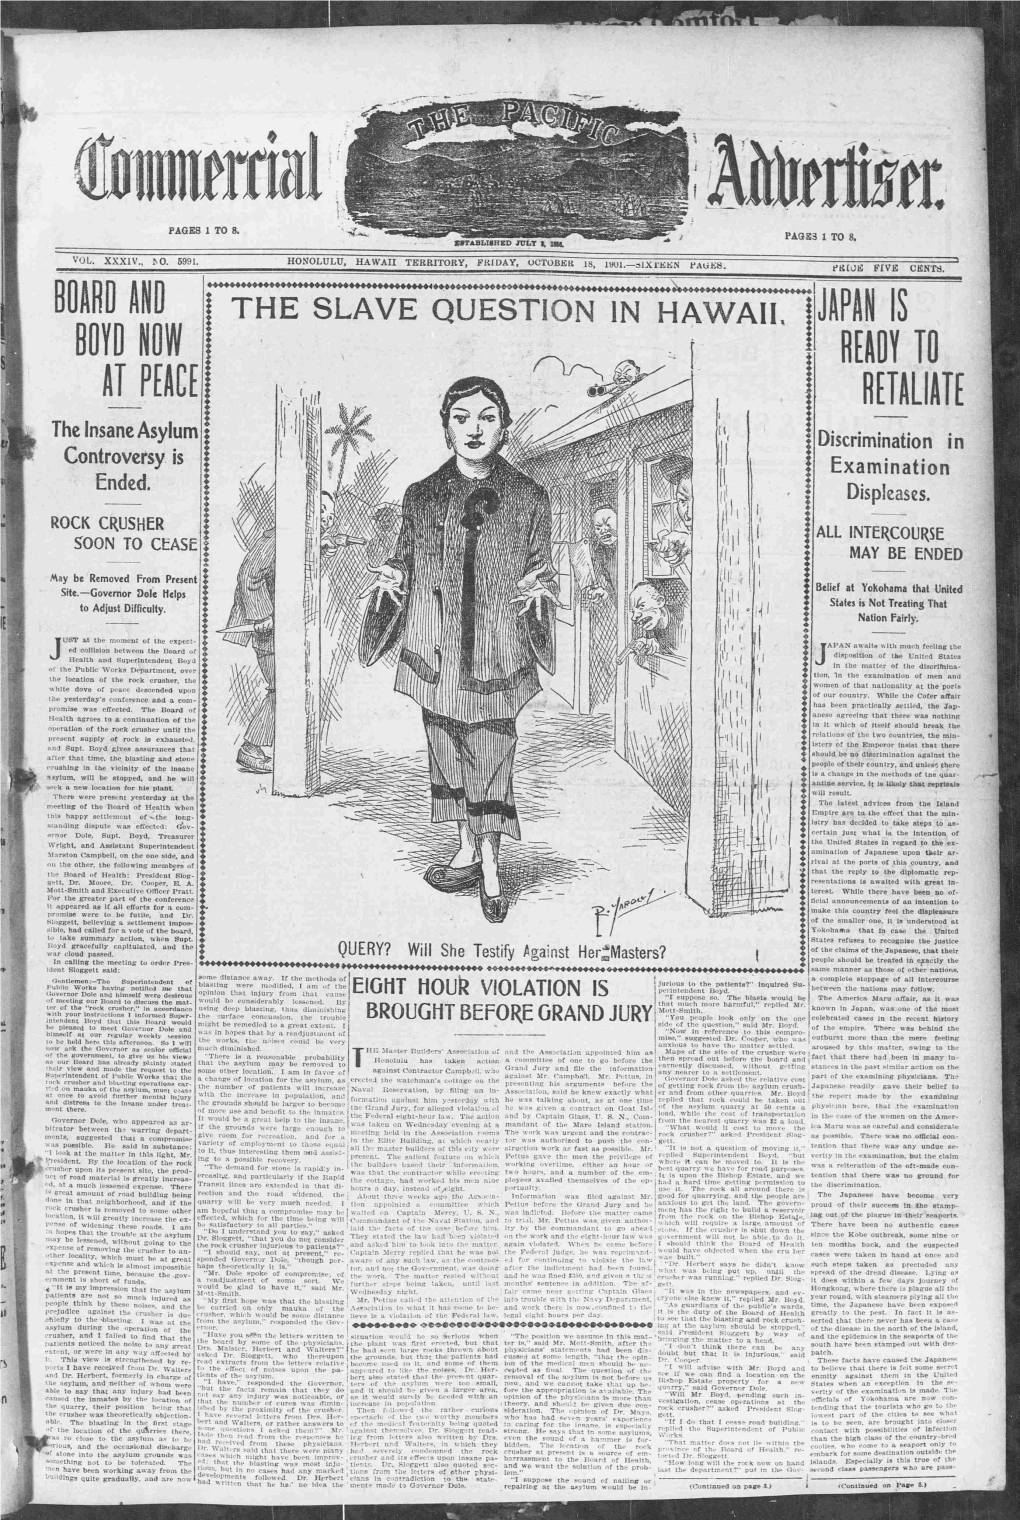 THE SLAVE QUESTION in HAWAII, I MIS BOYD NOW I REAOY TO